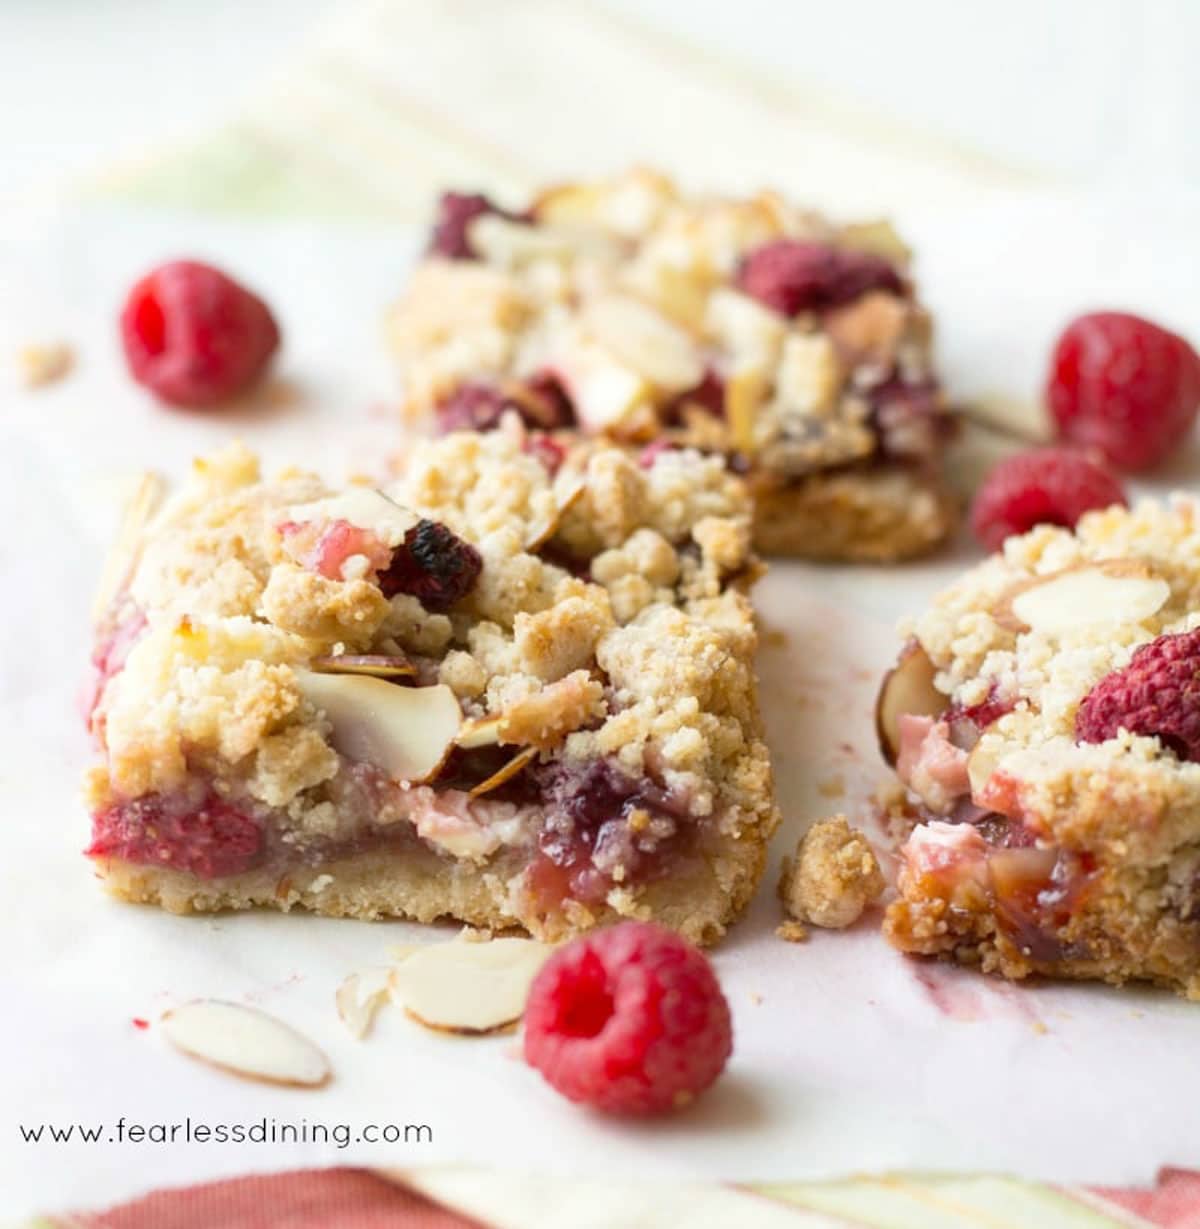 A close up of the raspberry crumble bars.